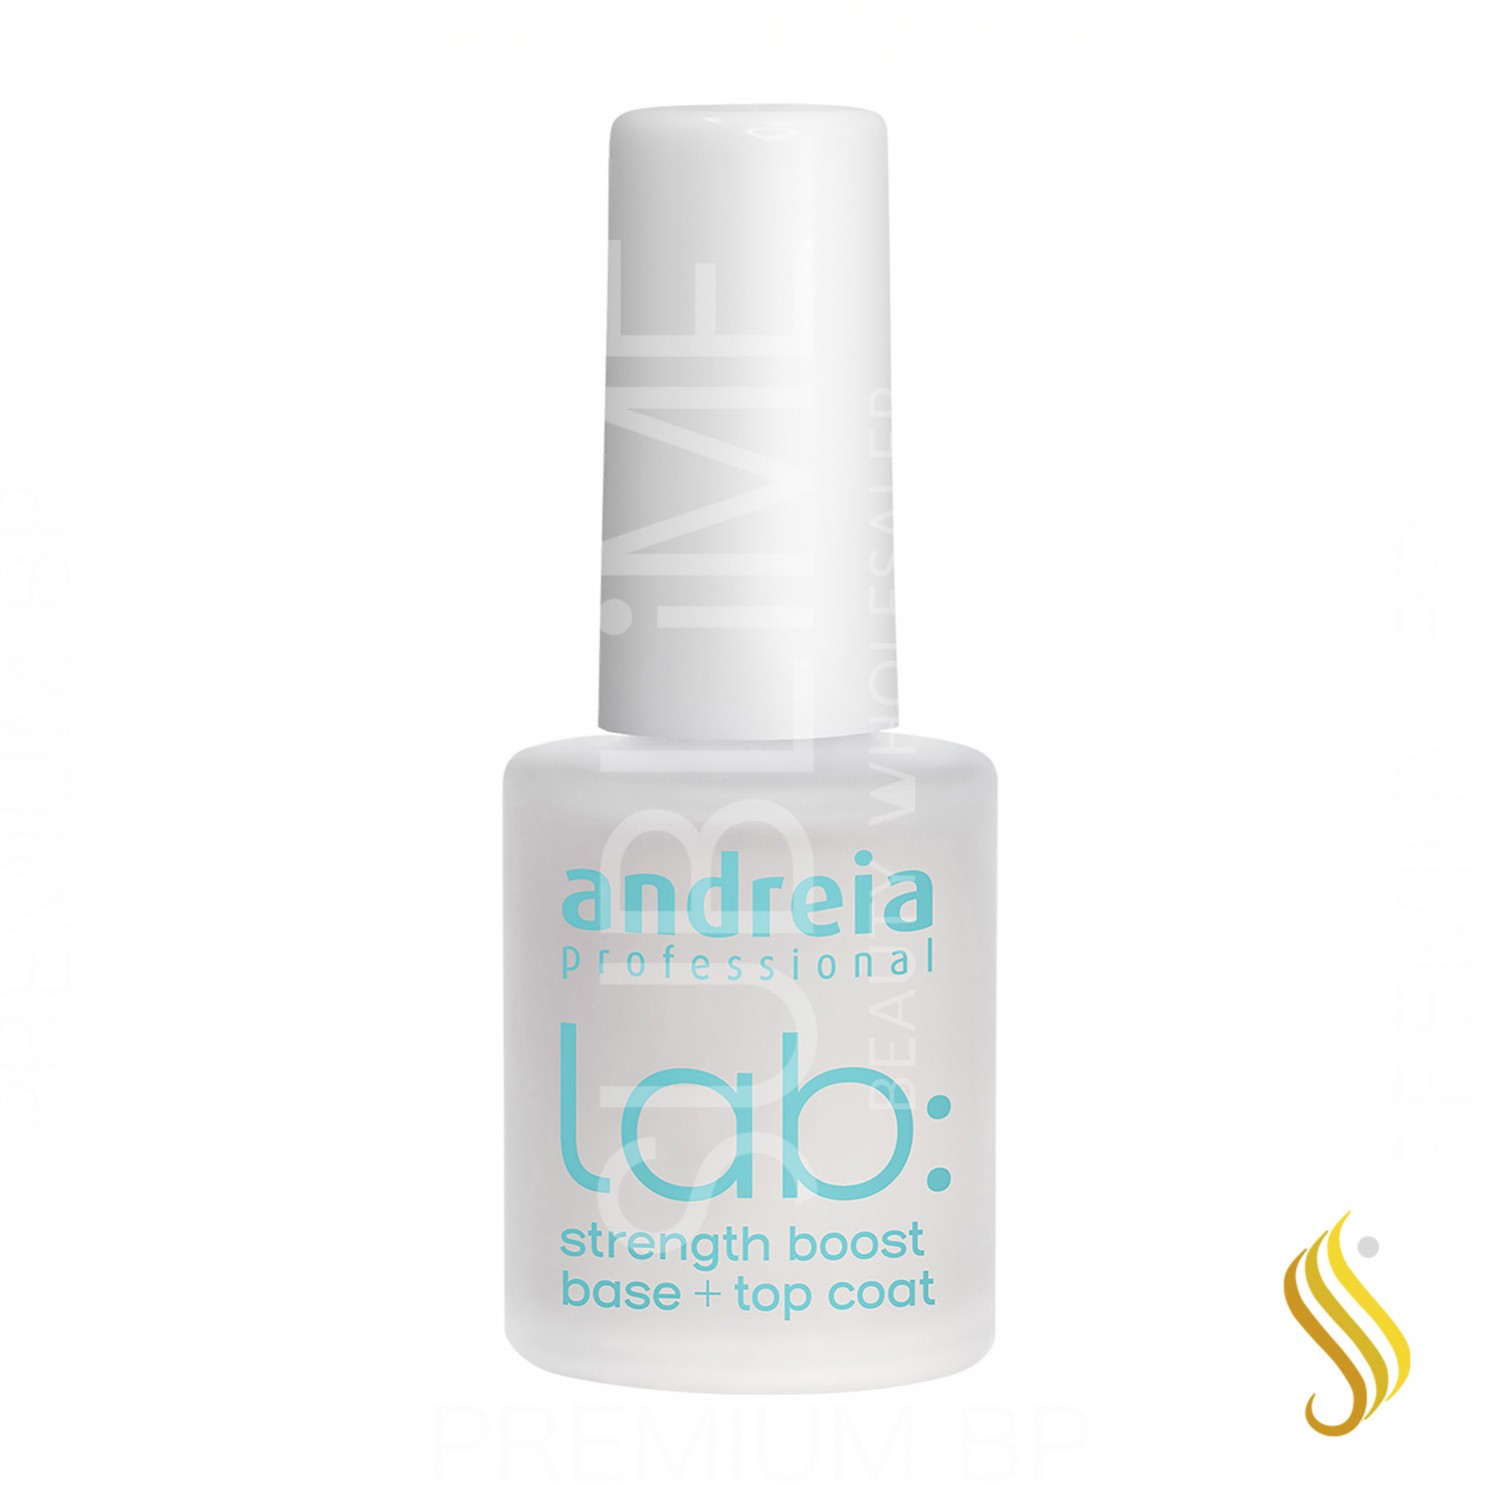 Andreia Professional Lab: Base + Top Coat Fortificante 10,5 ml